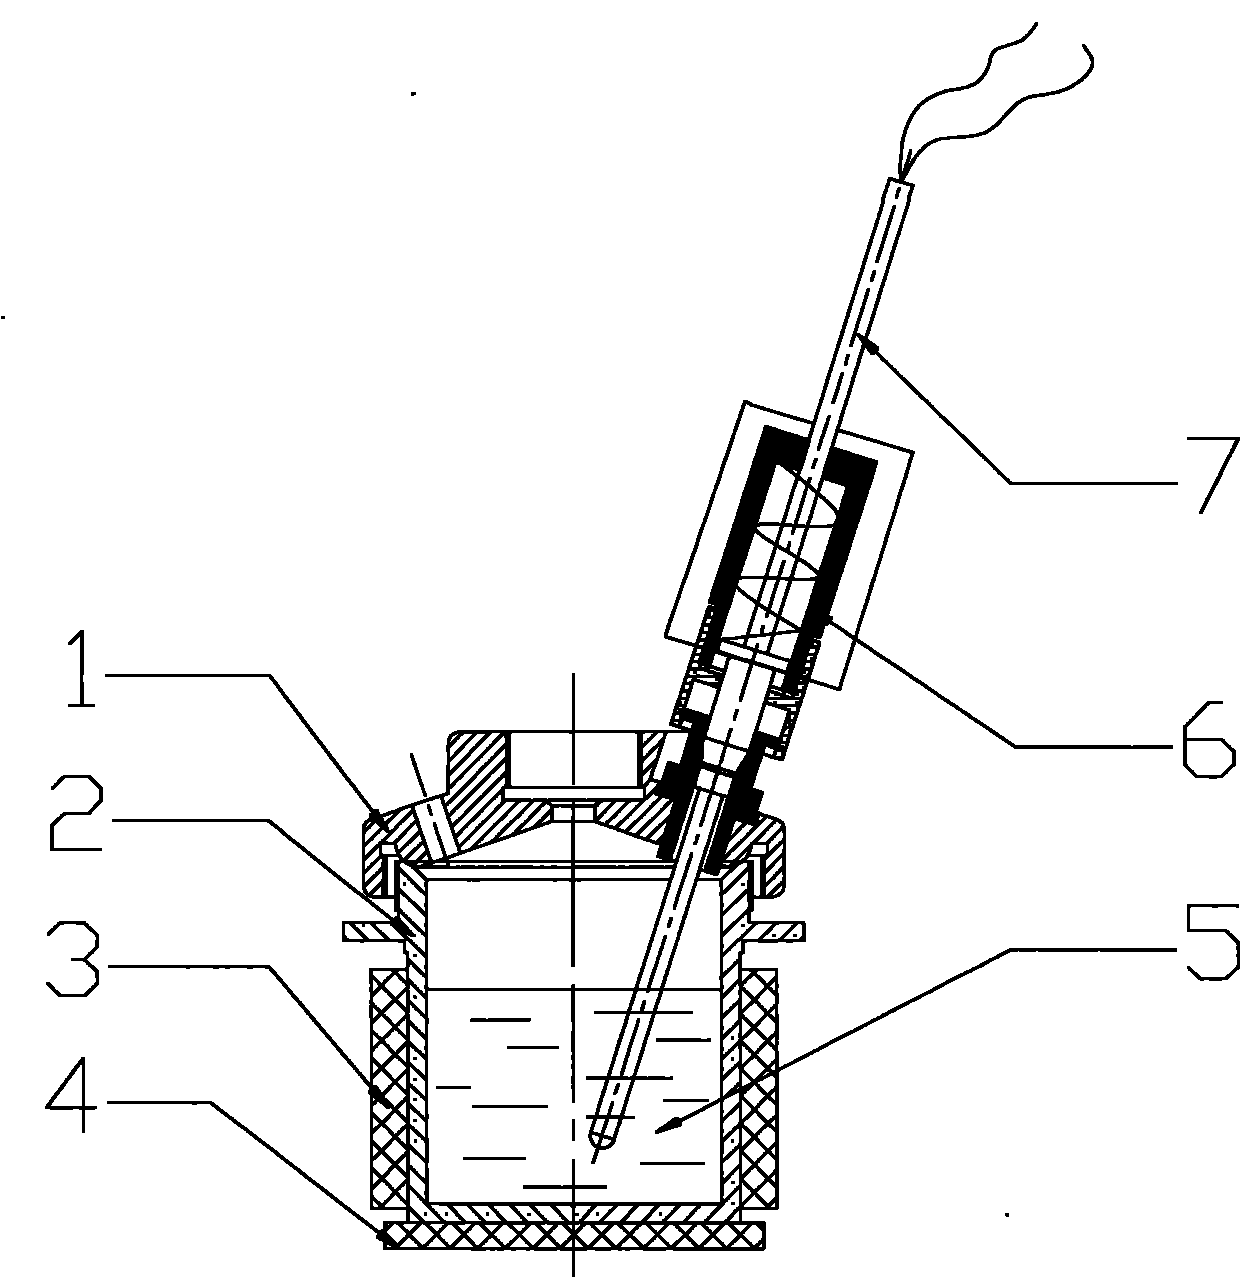 Novel method and device for detecting evaporation loss of lubricating oil